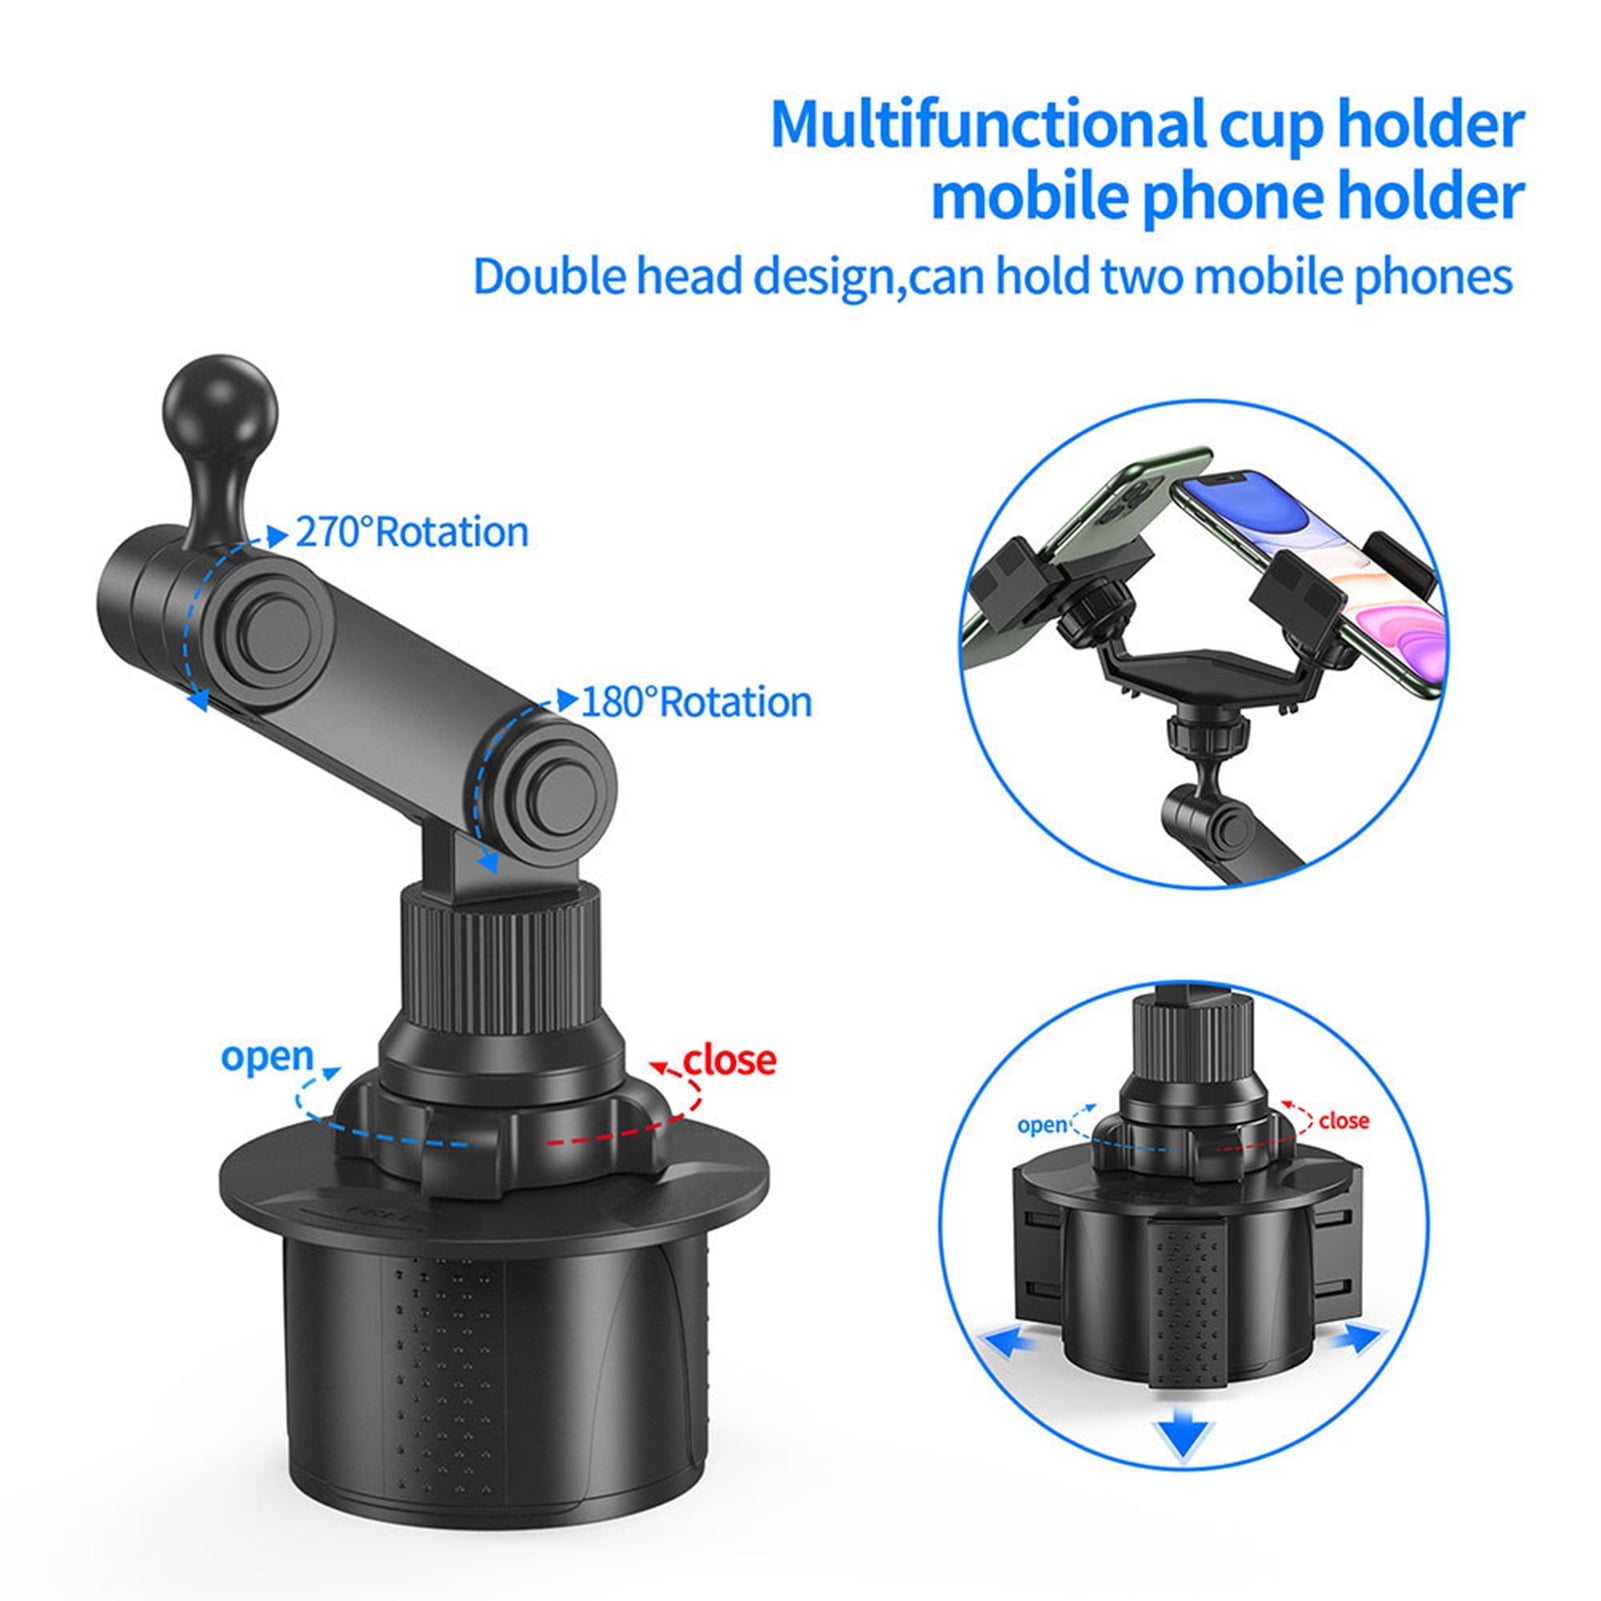 CAVIANA Dual Phone Holder for Car Cup Holder – Long Flexible Neck, 360°  Rotatable Car Phone Mount - Adjustable Cell Phone Cup Holder, Universal  Size